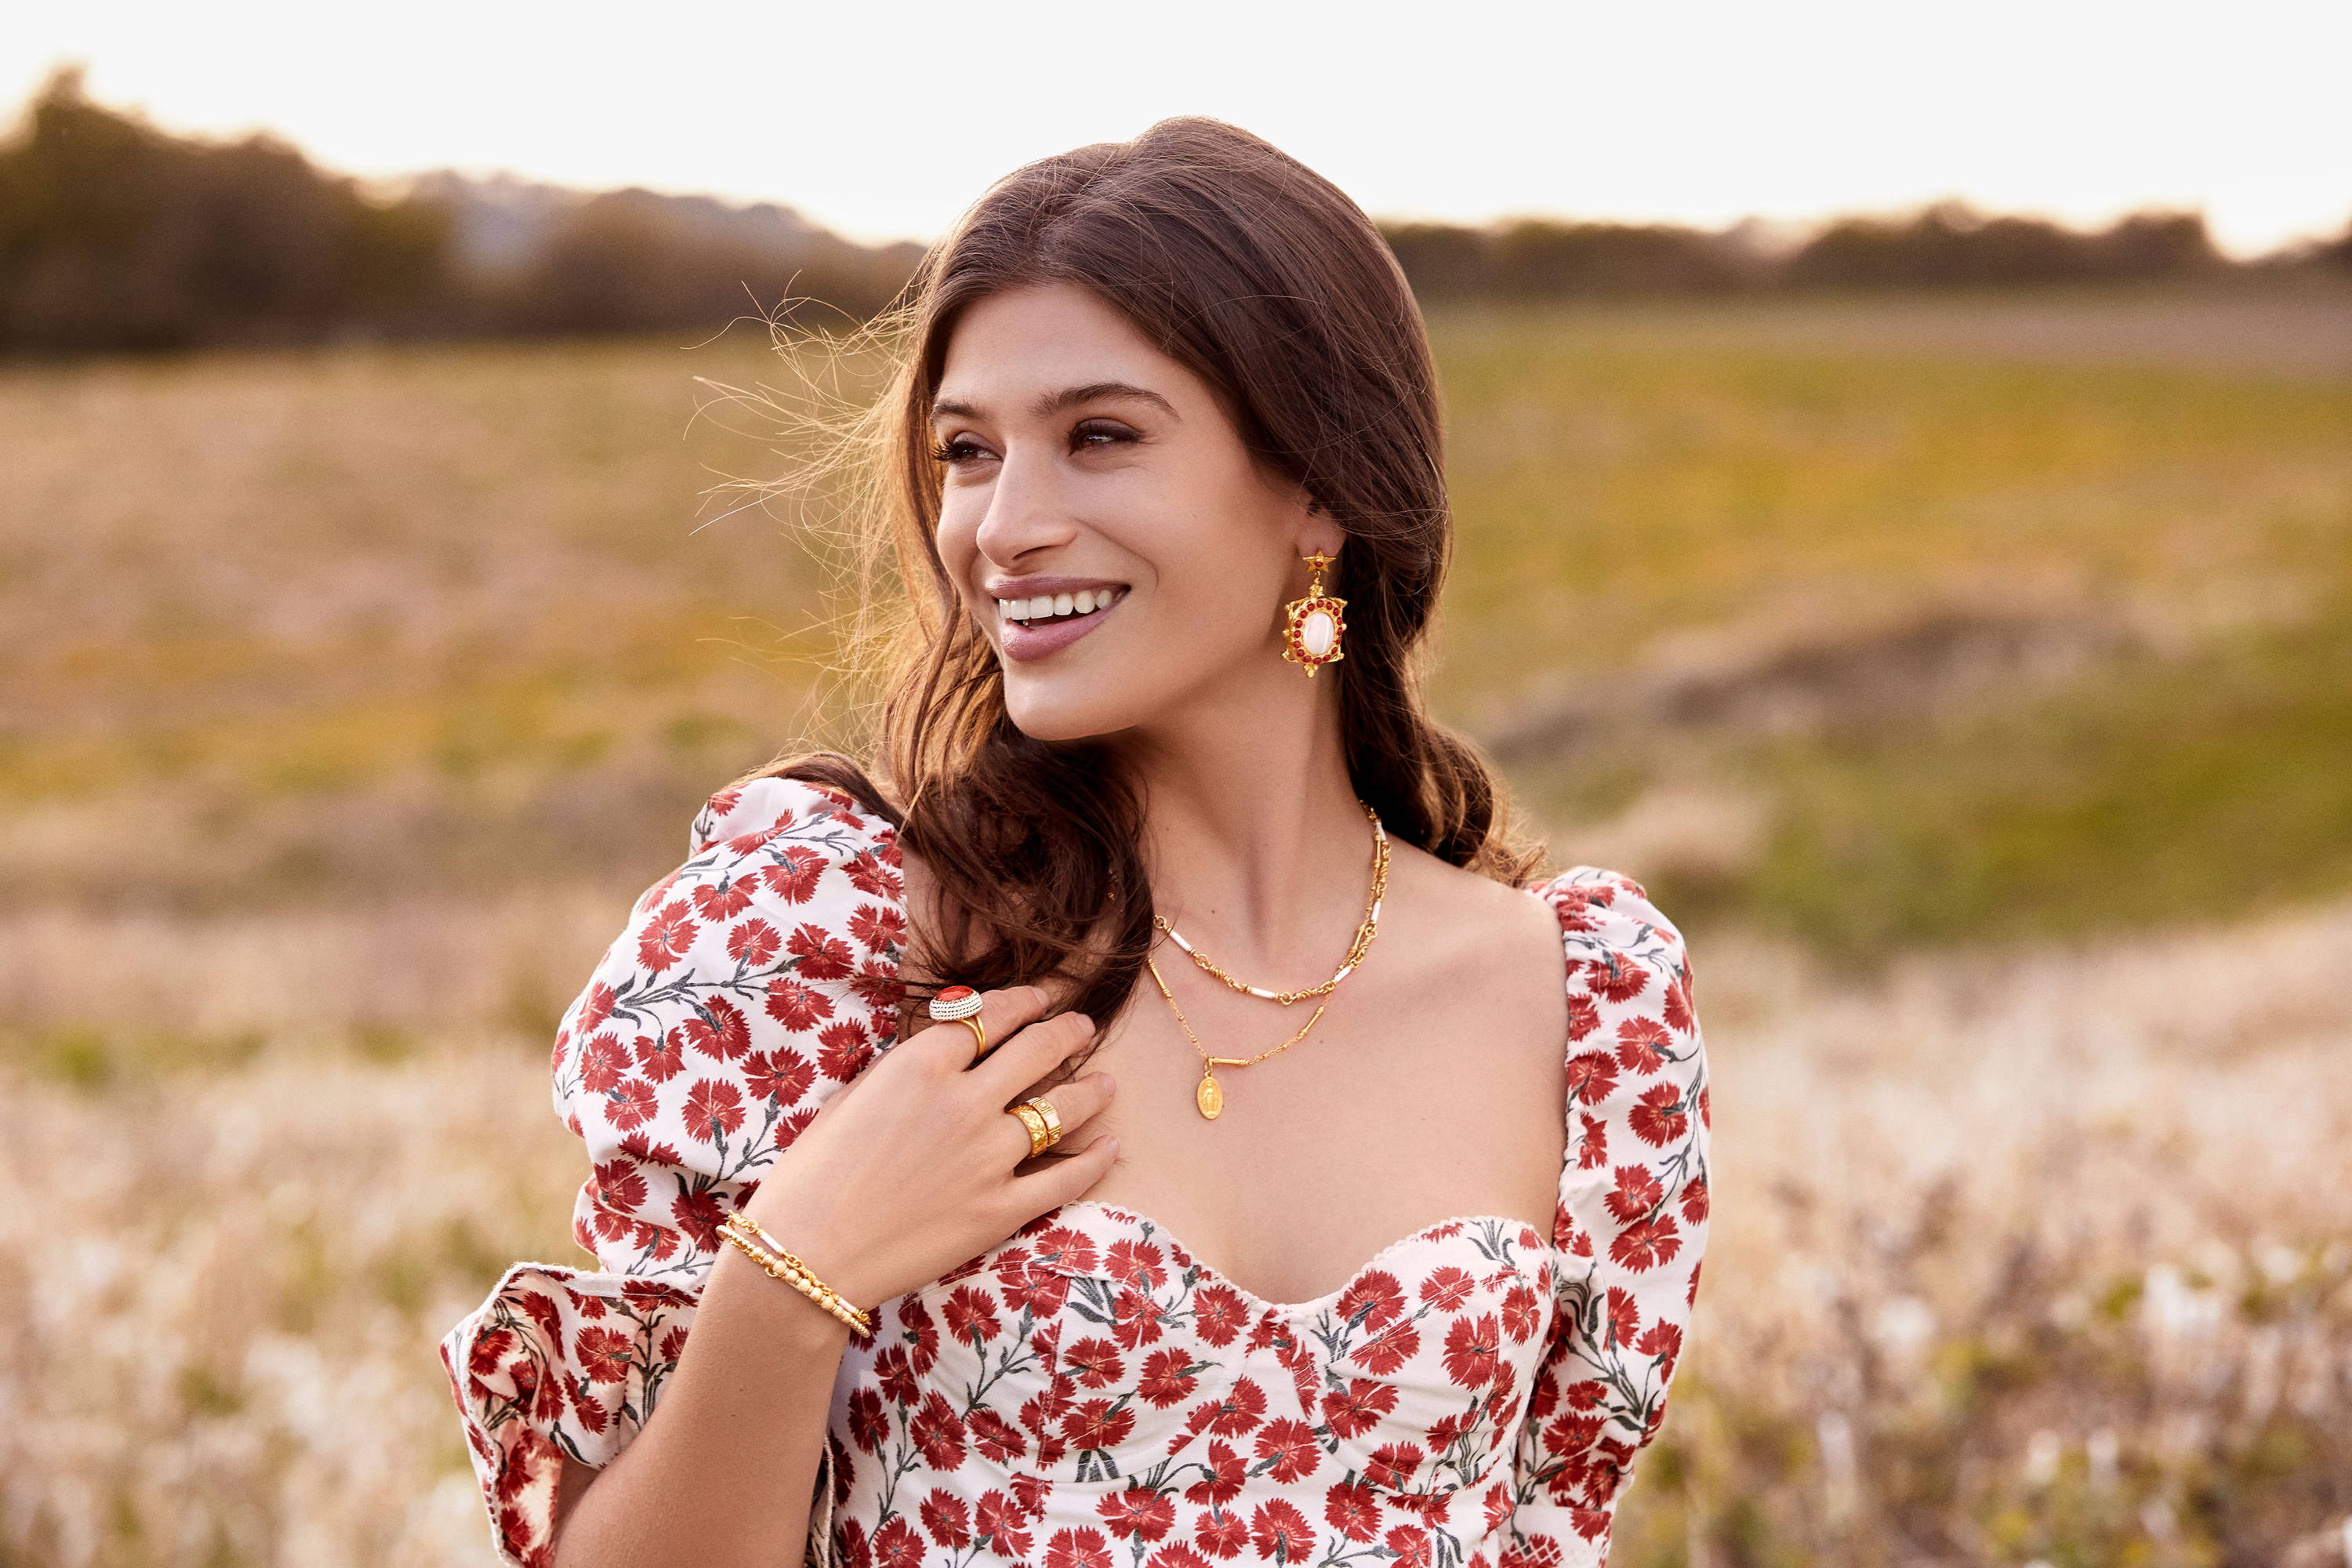 Cairo wears the Mother of Pearl and Coral Earrings, Lavinia Necklace, Mini Pellegrino Necklace, Lavinia Bracelet, Graziella Bracelet, Laurel Ring, White Tullia Ring and Coral Ring